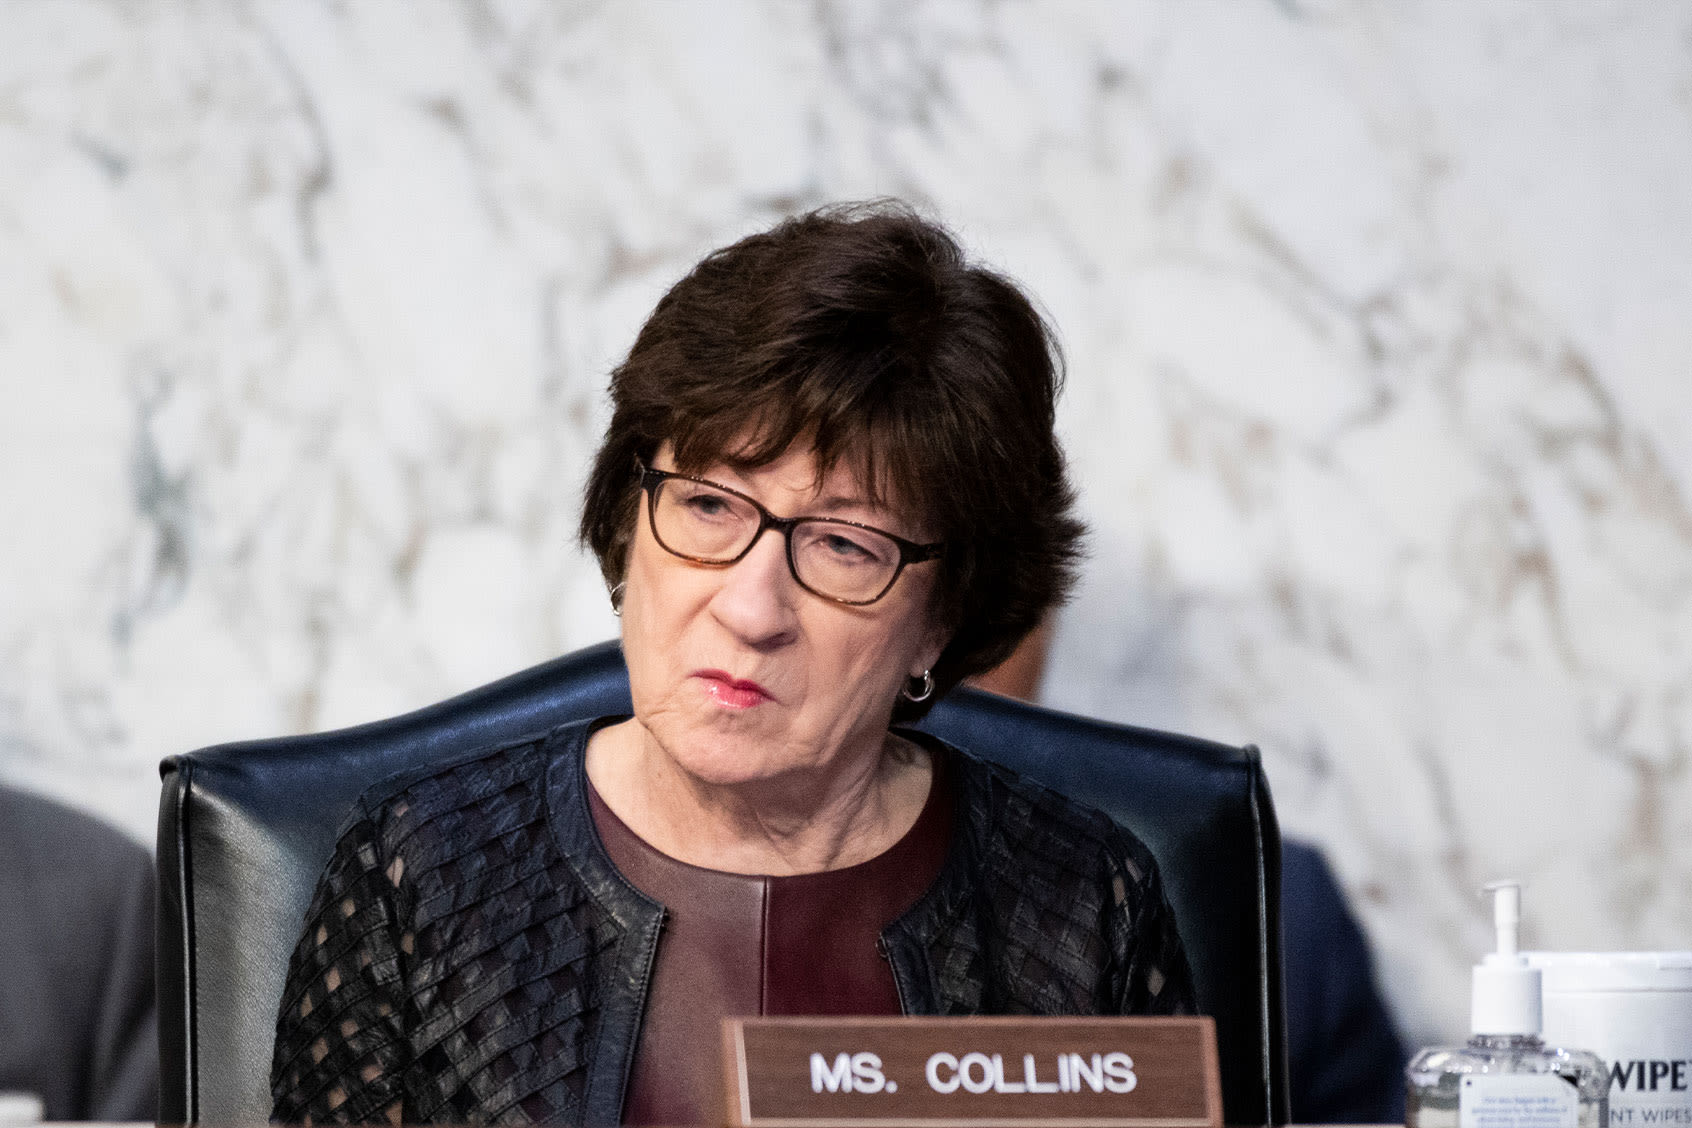 Susan Collins won't vote for either guy, opting for Nikki Haley instead